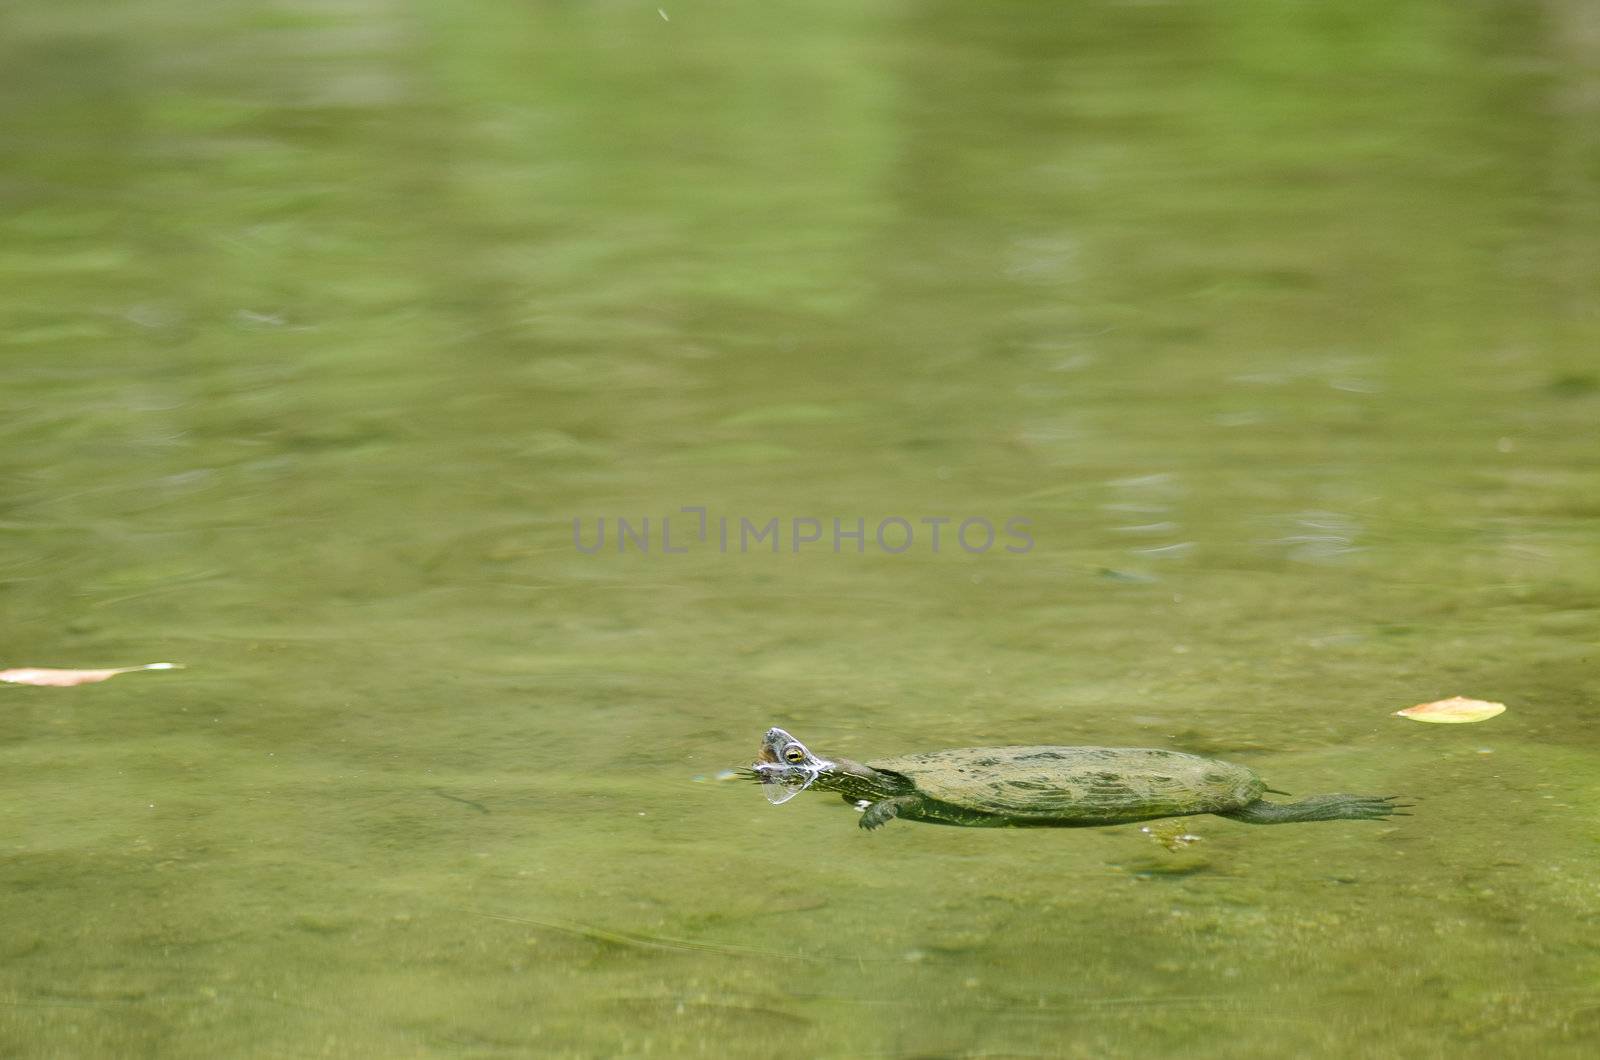 Chinese pond turtle swimming in water, Mauremys reevesii, an endangered species